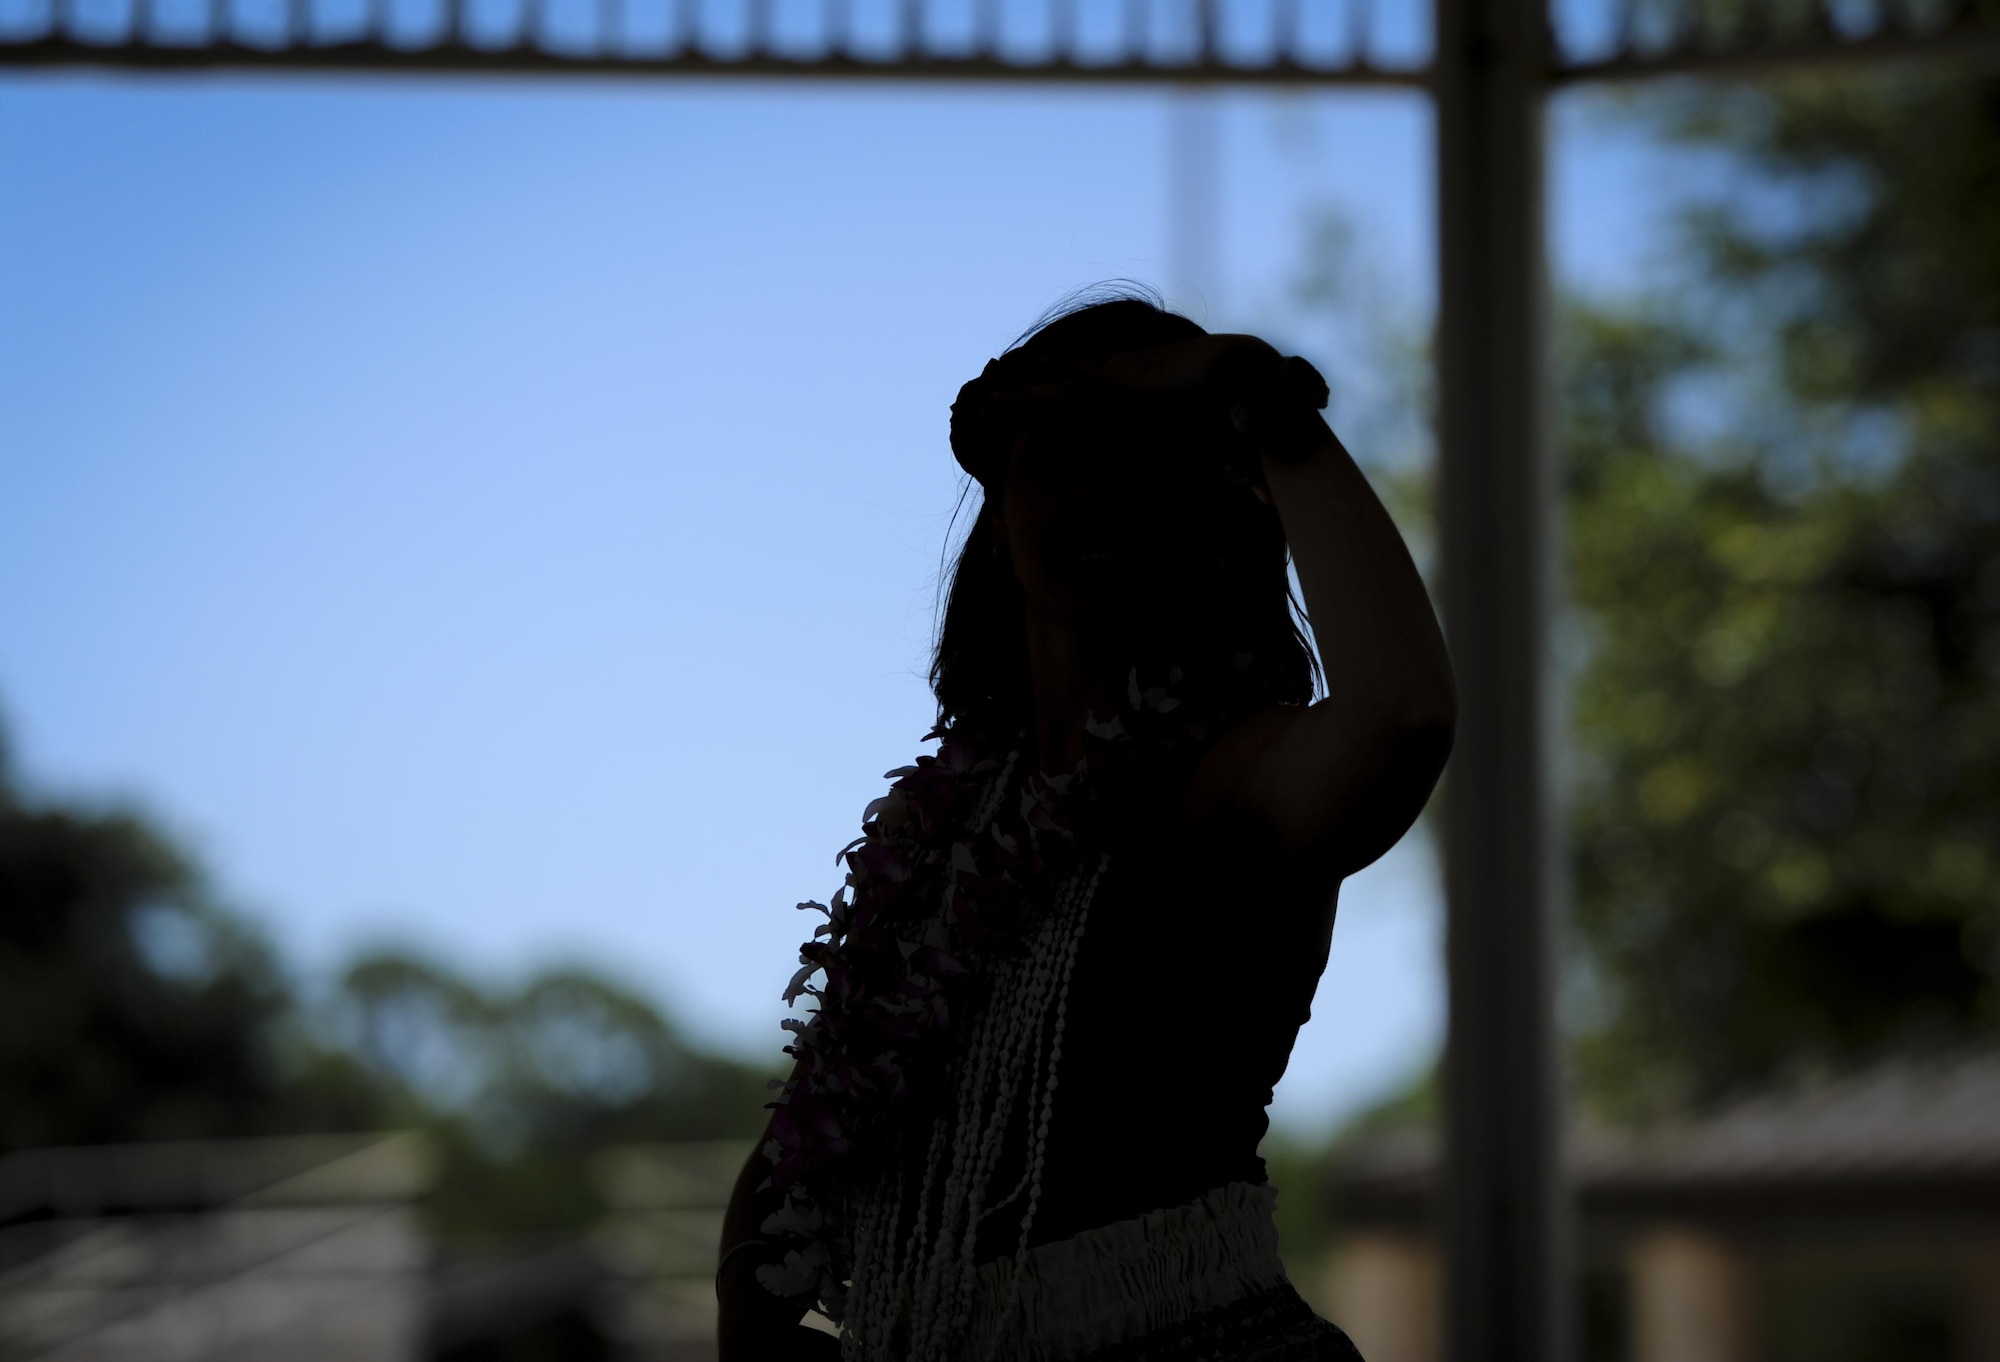 An Airmen with the 25th Intelligence Squadron performs a Hula dance during the Asian American and Pacific Islander Cultural Day event at Hurlburt Field, Fla., May 25, 2017. Mallet was born in Honolulu, Hawaii, learned to hula when she was five-years-old and was featured in several dance shows around the island. The Asian American and Pacific Islander Cultural Day event included the demonstration, free food and a hula demonstration. (U.S. Air Force photo by Airman 1st Class Dennis Spain)